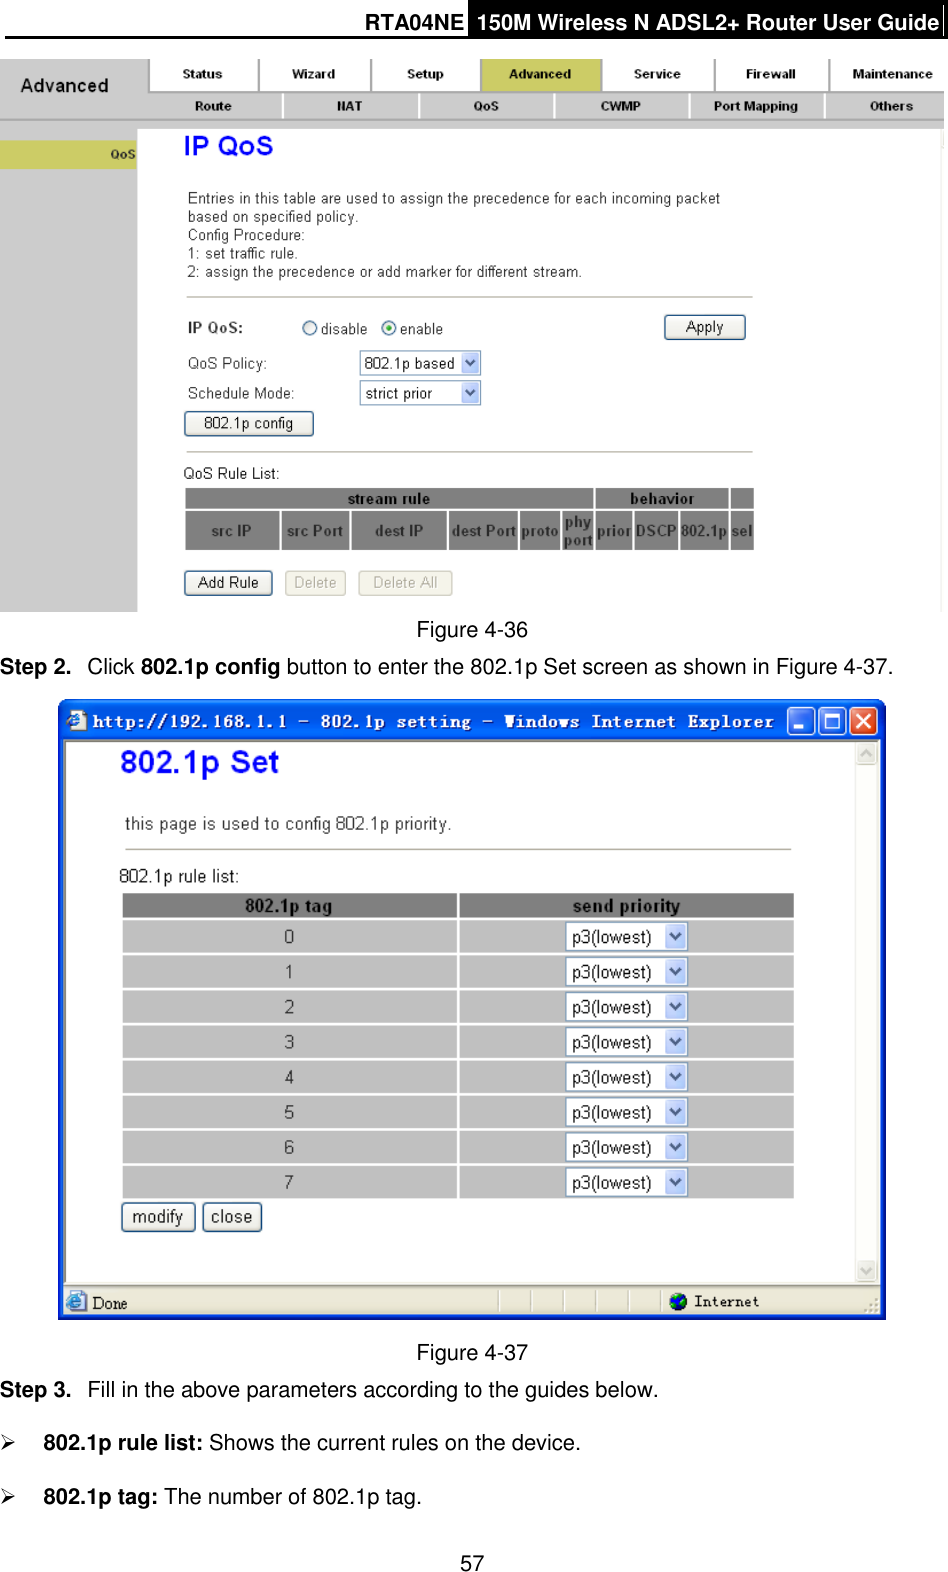 RTA04NE 150M Wireless N ADSL2+ Router User Guide  57  Figure 4-36 Step 2.  Click 802.1p config button to enter the 802.1p Set screen as shown in Figure 4-37.  Figure 4-37 Step 3.  Fill in the above parameters according to the guides below.  802.1p rule list: Shows the current rules on the device.  802.1p tag: The number of 802.1p tag. 